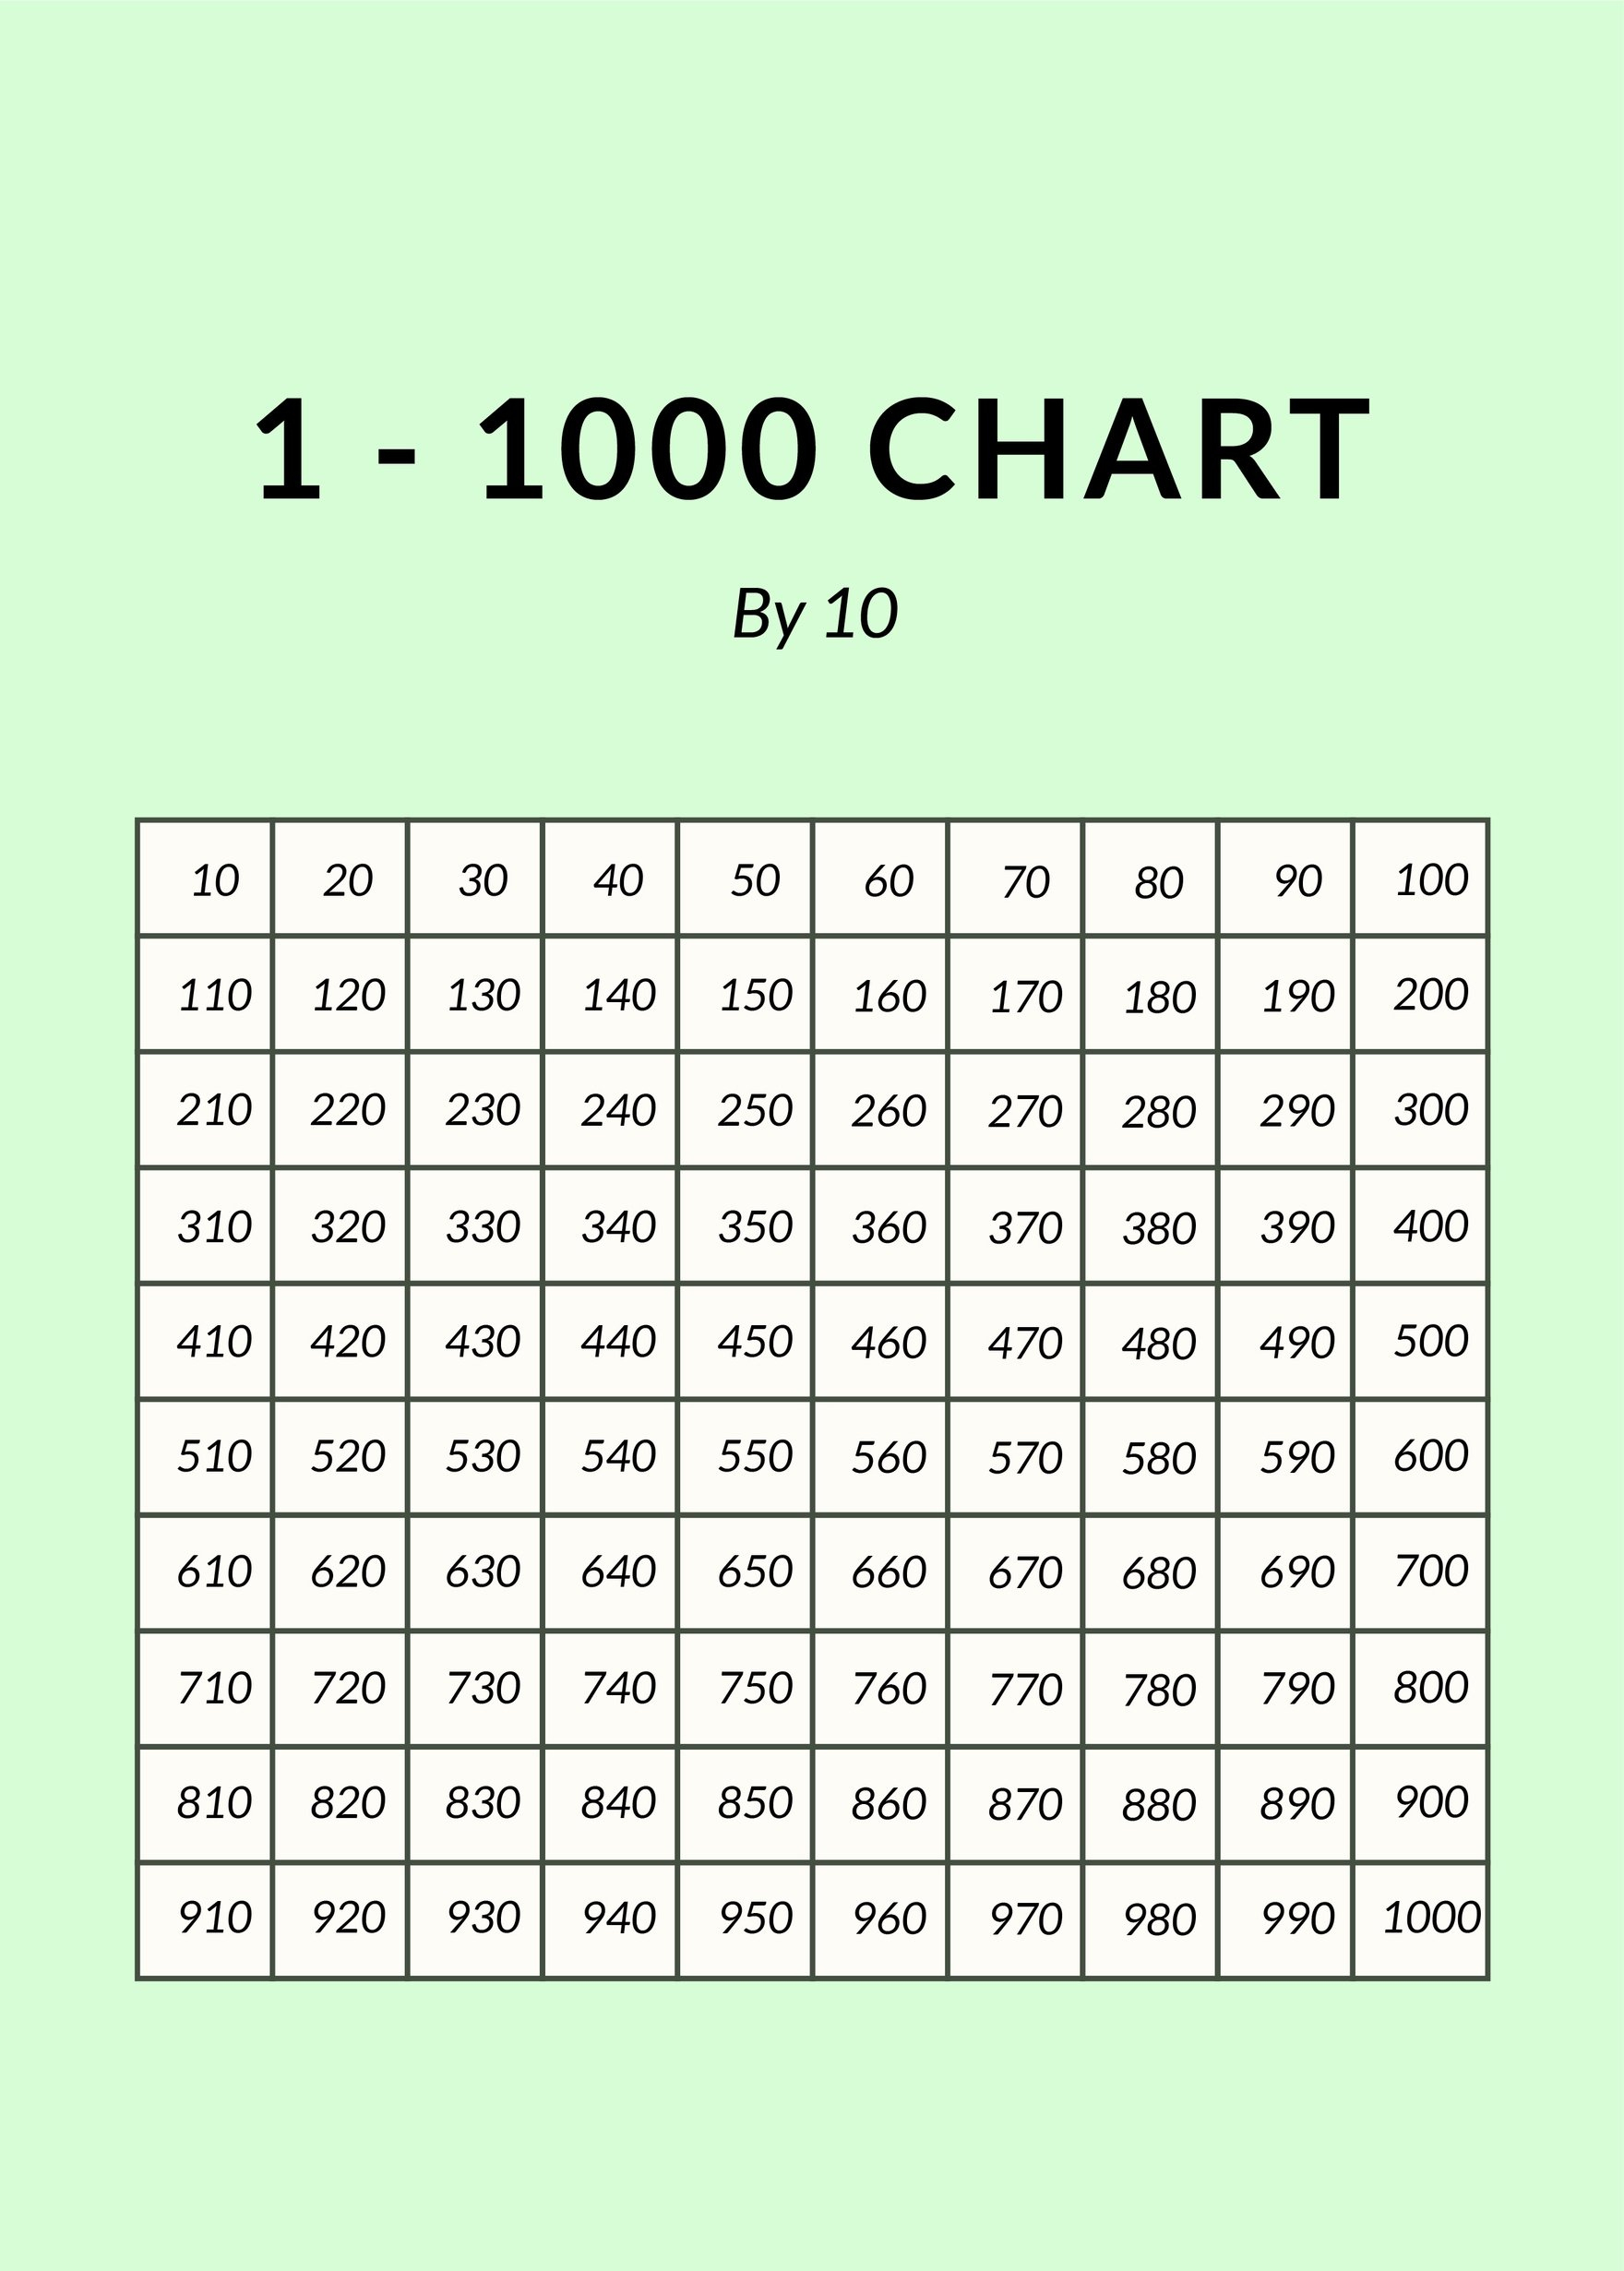 1 - 1000 Number Chart In Psd, Illustrator, Word, Pdf - Download throughout Free Printable Number Chart to 1000